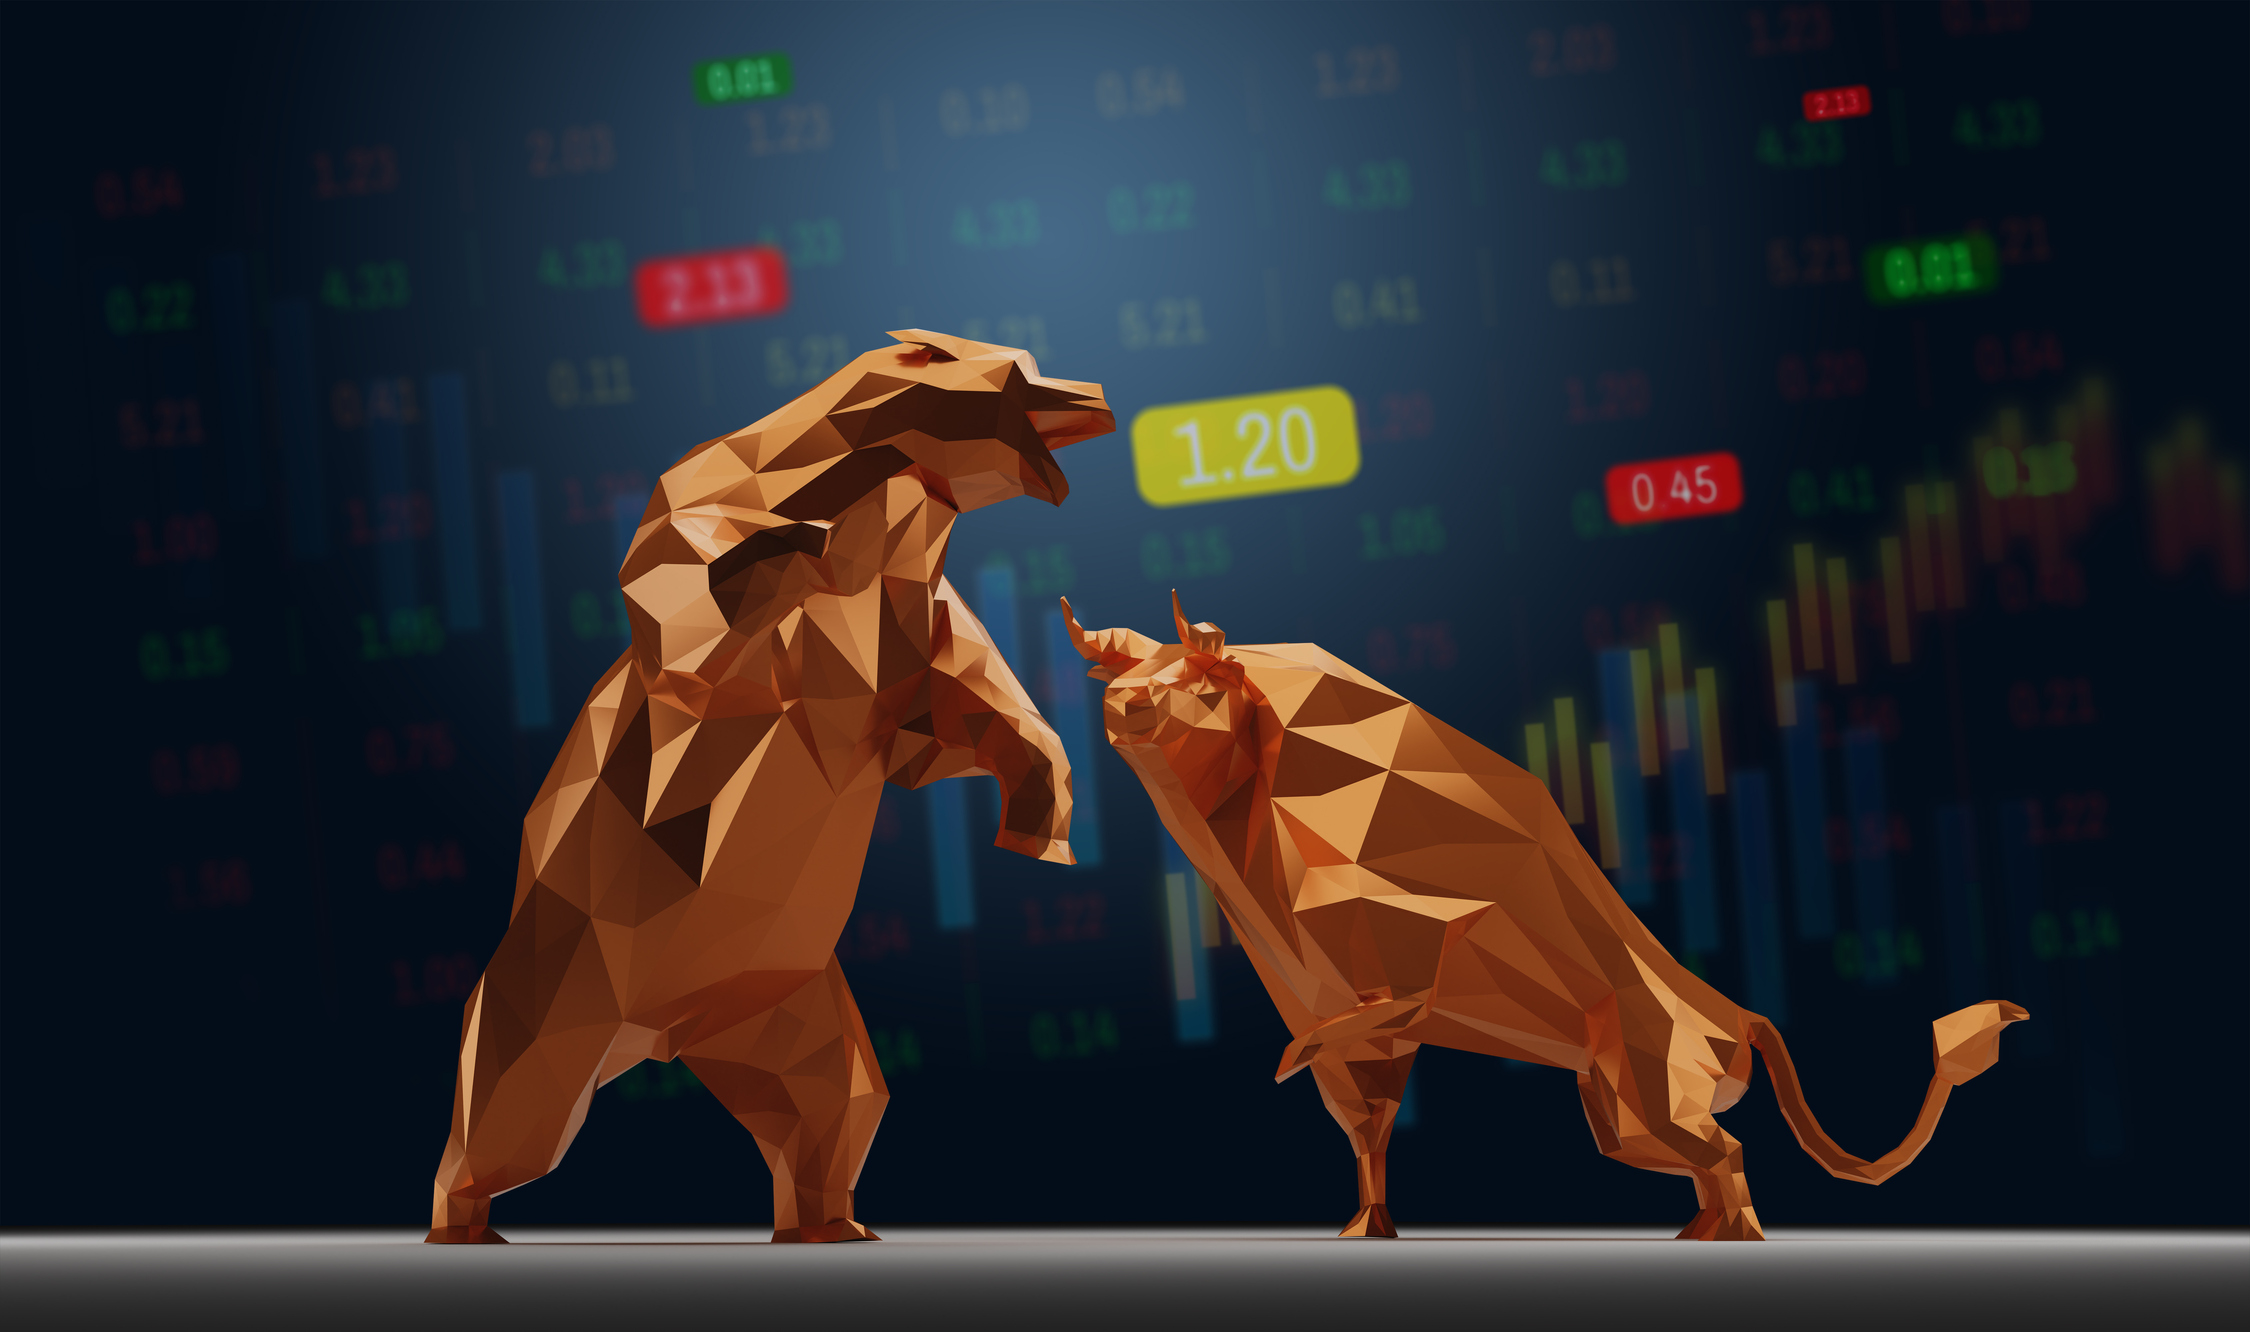 Will April Bring Bulls or Bears to the Stock Market